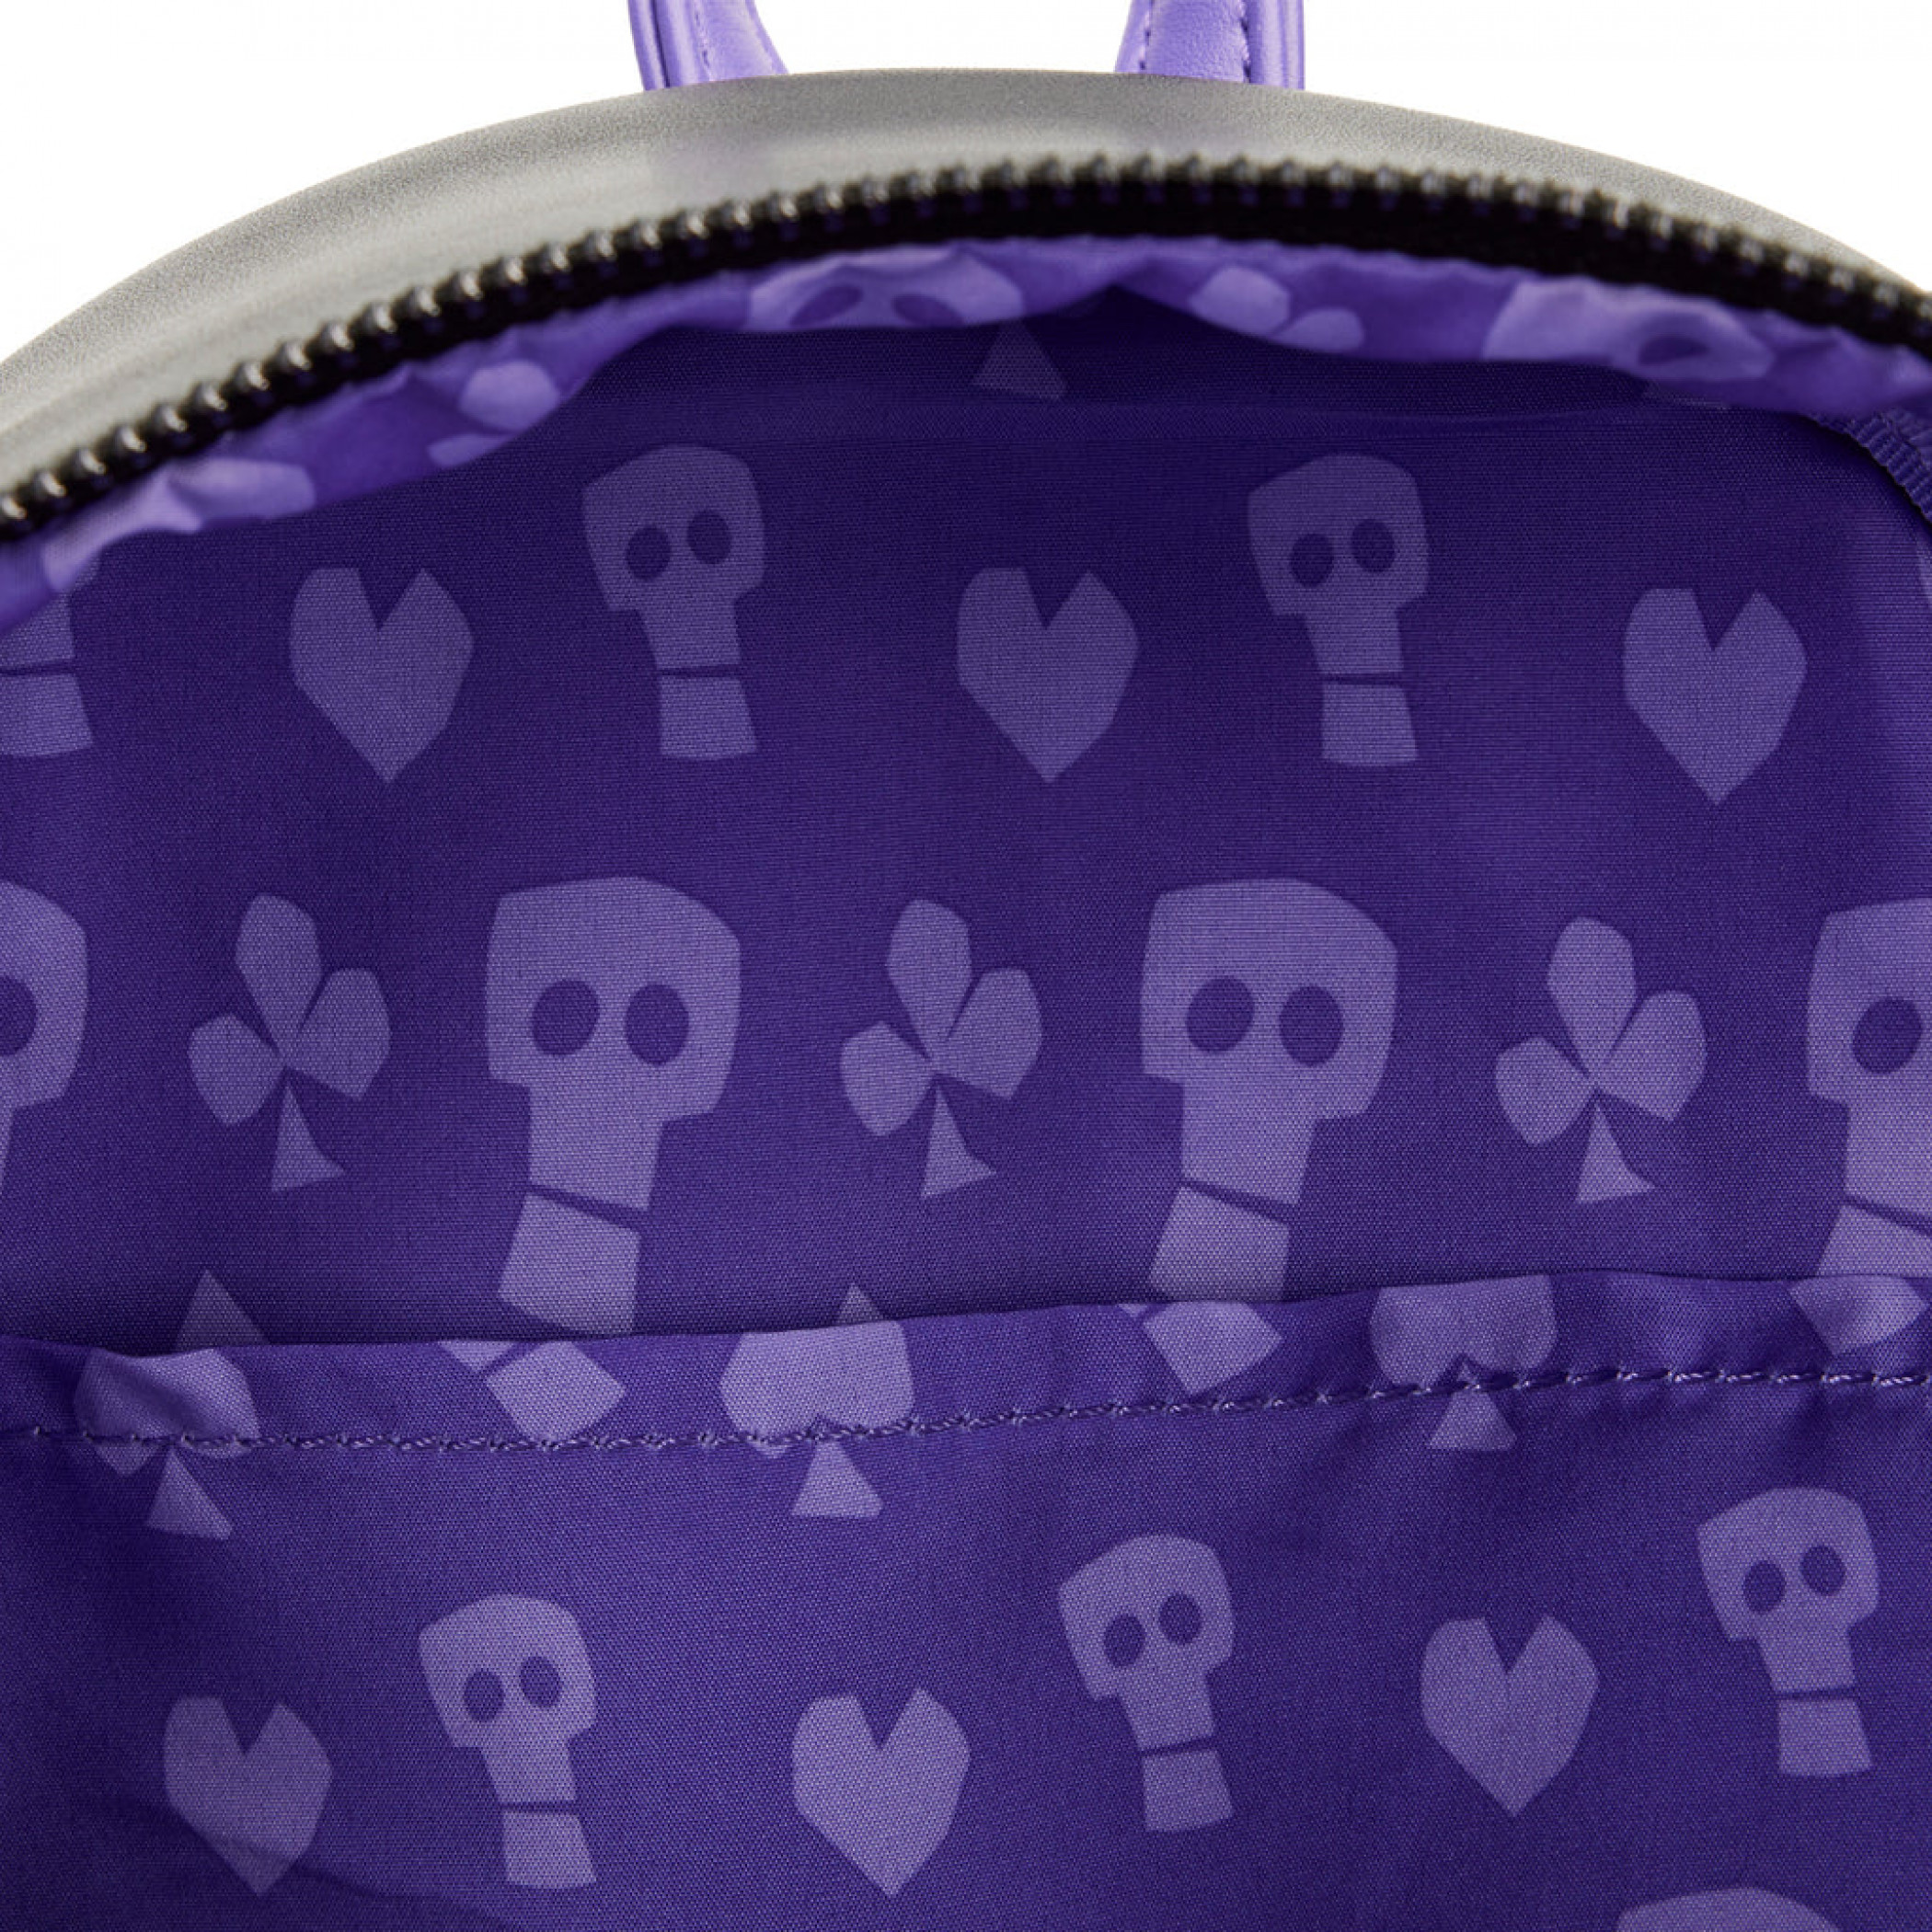 The Nightmare Before Christmas Oogie Boogie Glow in the Dark Backpack from Loungefly